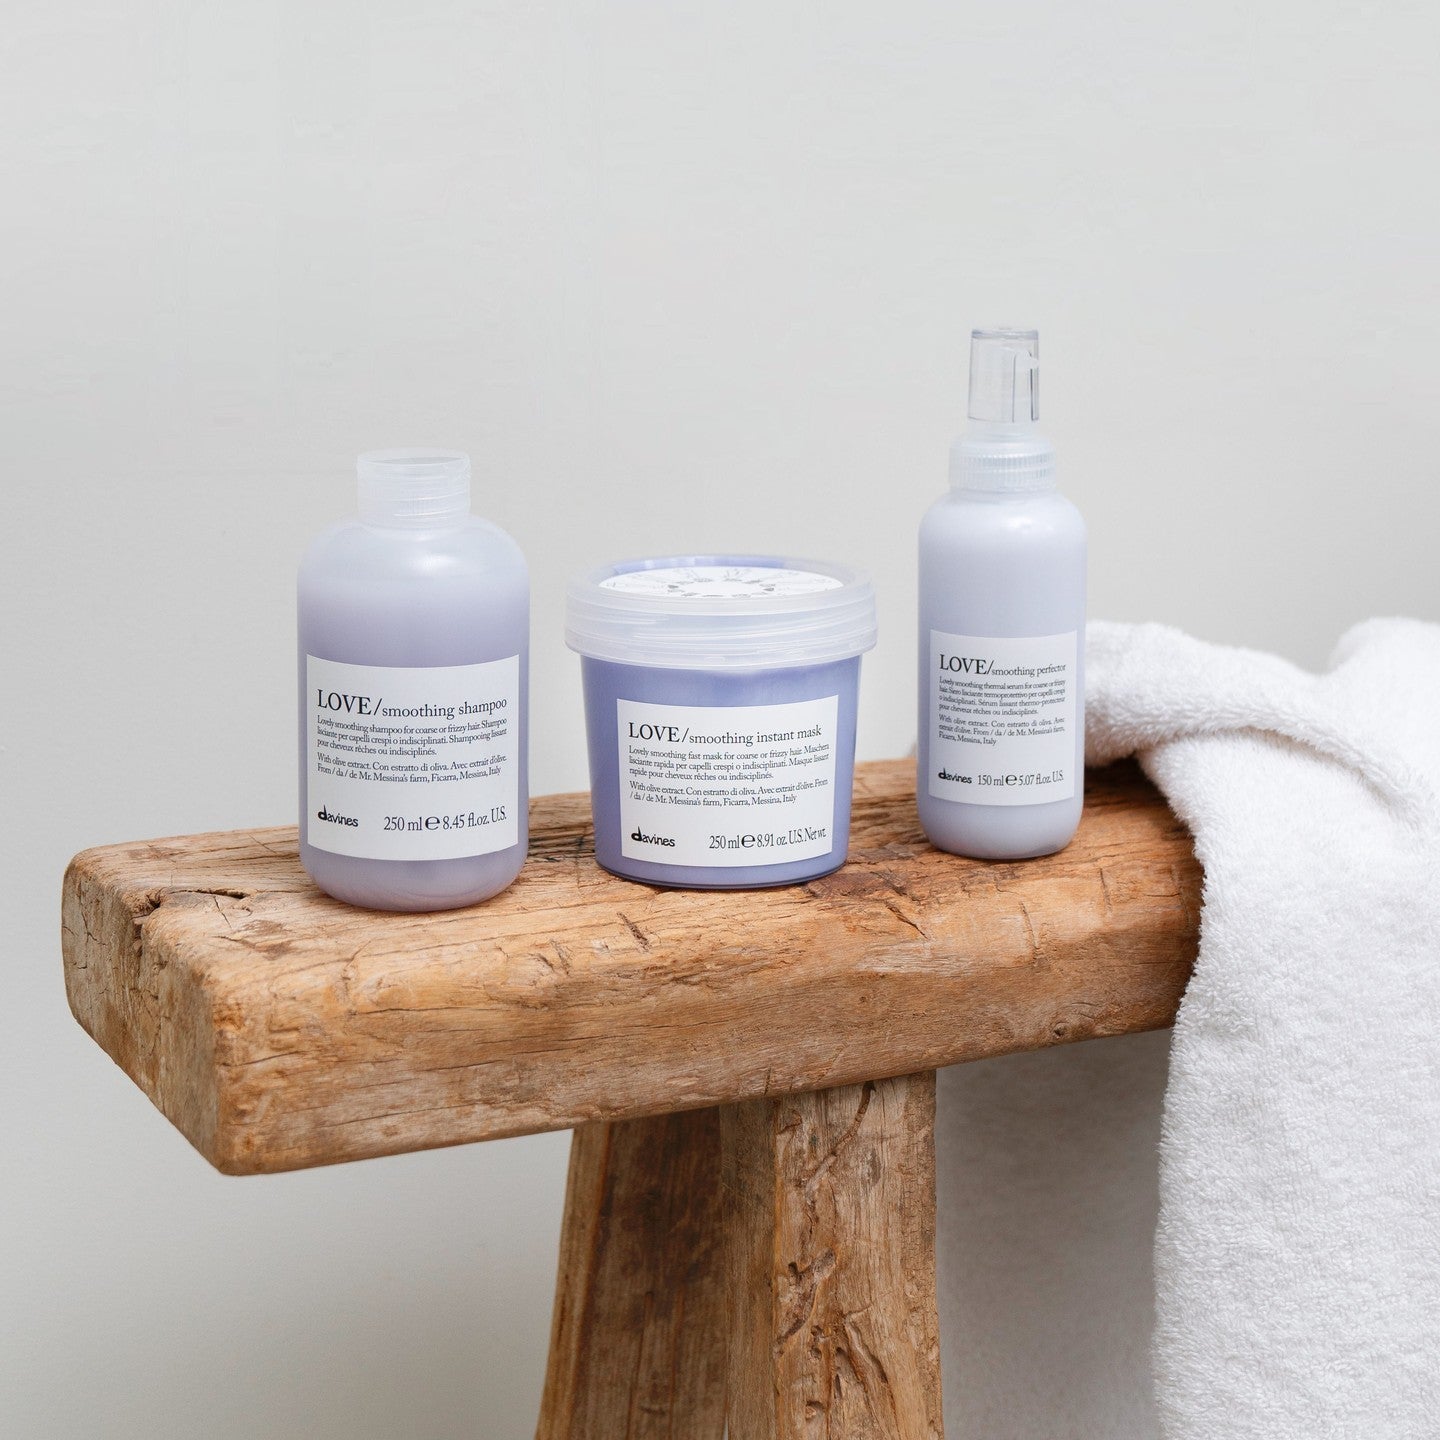 Davines Love Smoothing Hair Products on Wooden Bench with White Towel - Shampoo, Conditioner, Perfector